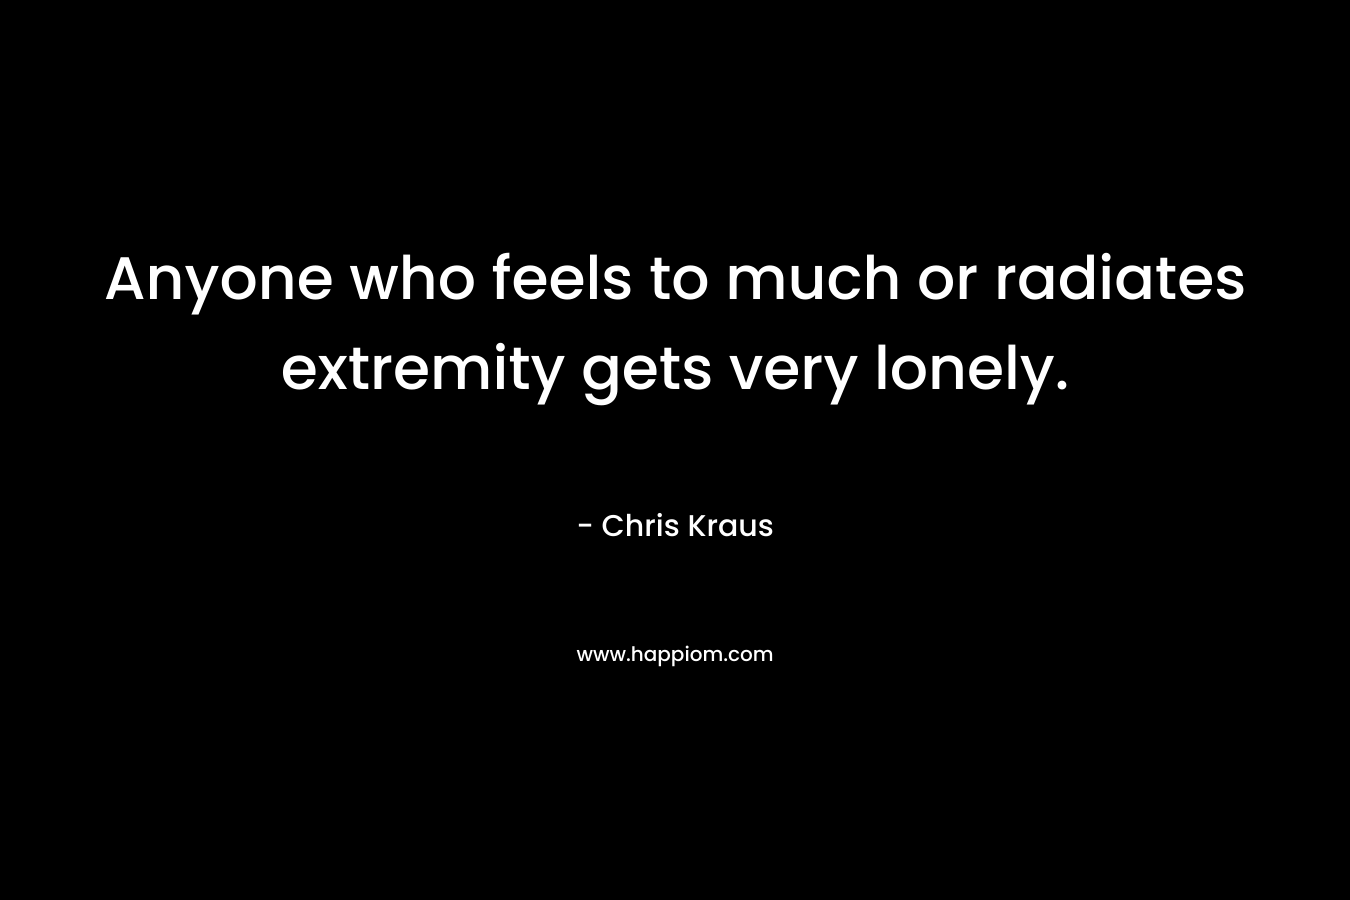 Anyone who feels to much or radiates extremity gets very lonely. – Chris Kraus